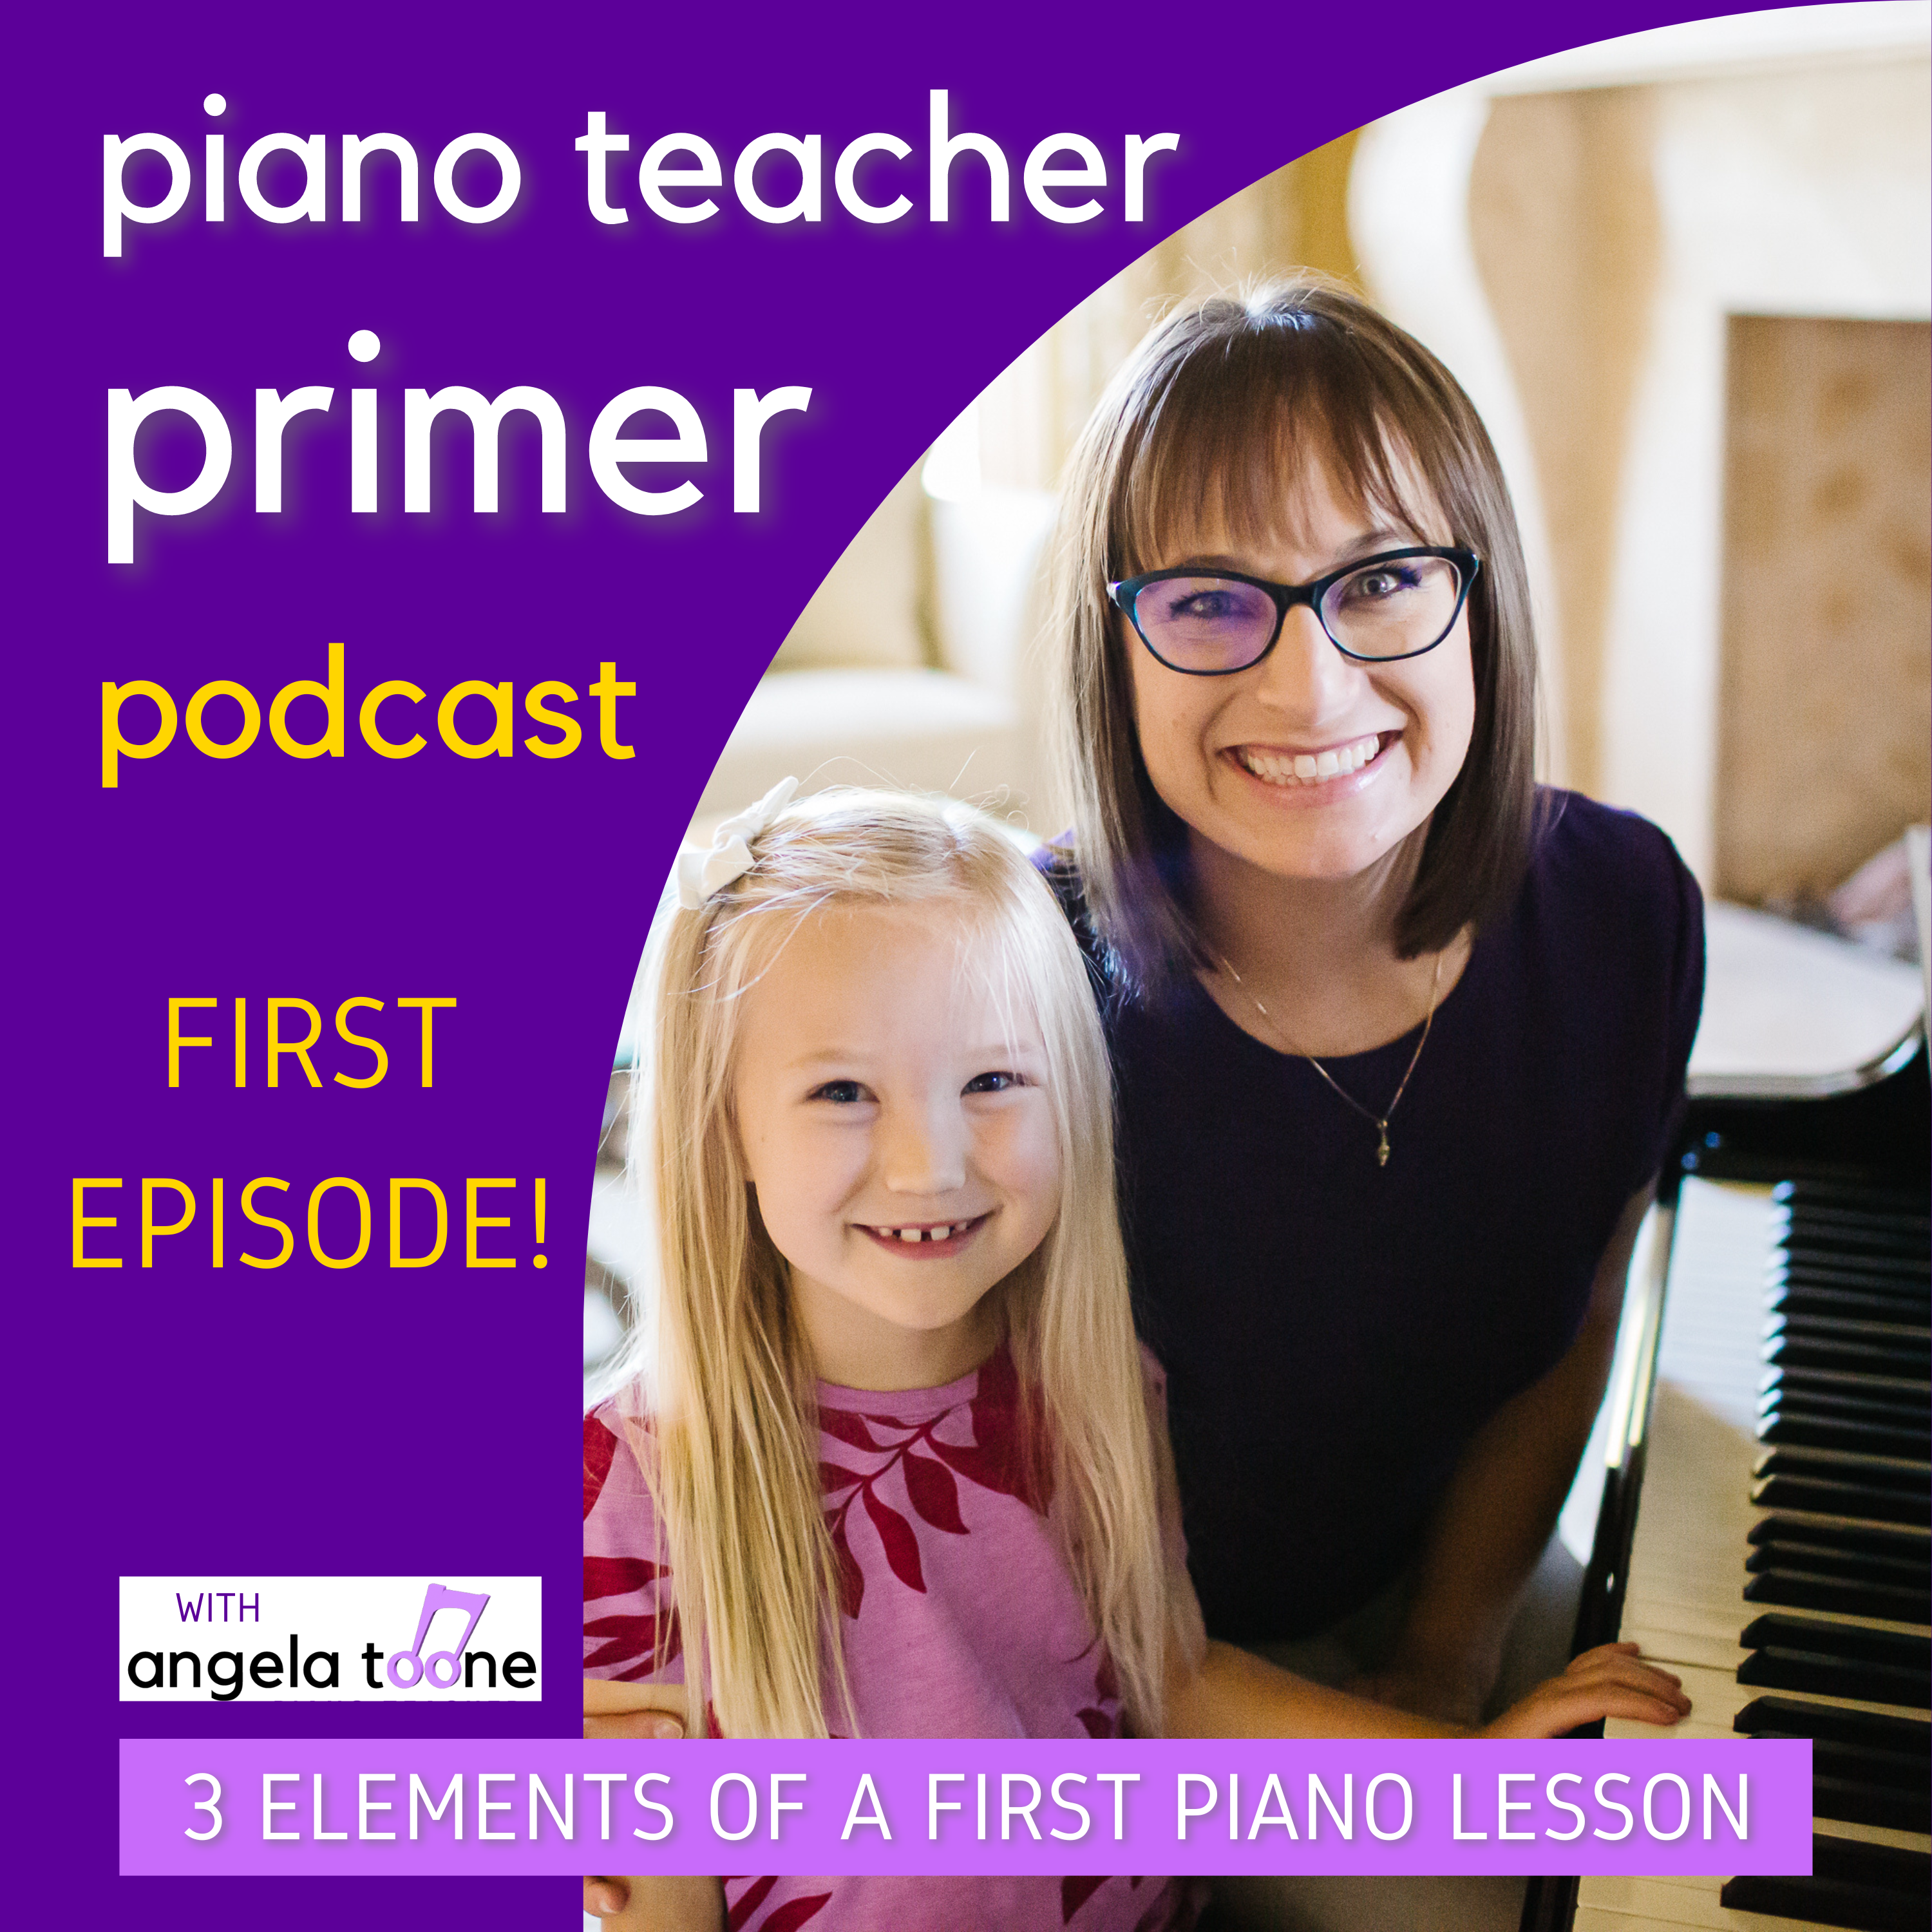 piano teacher with child smiling